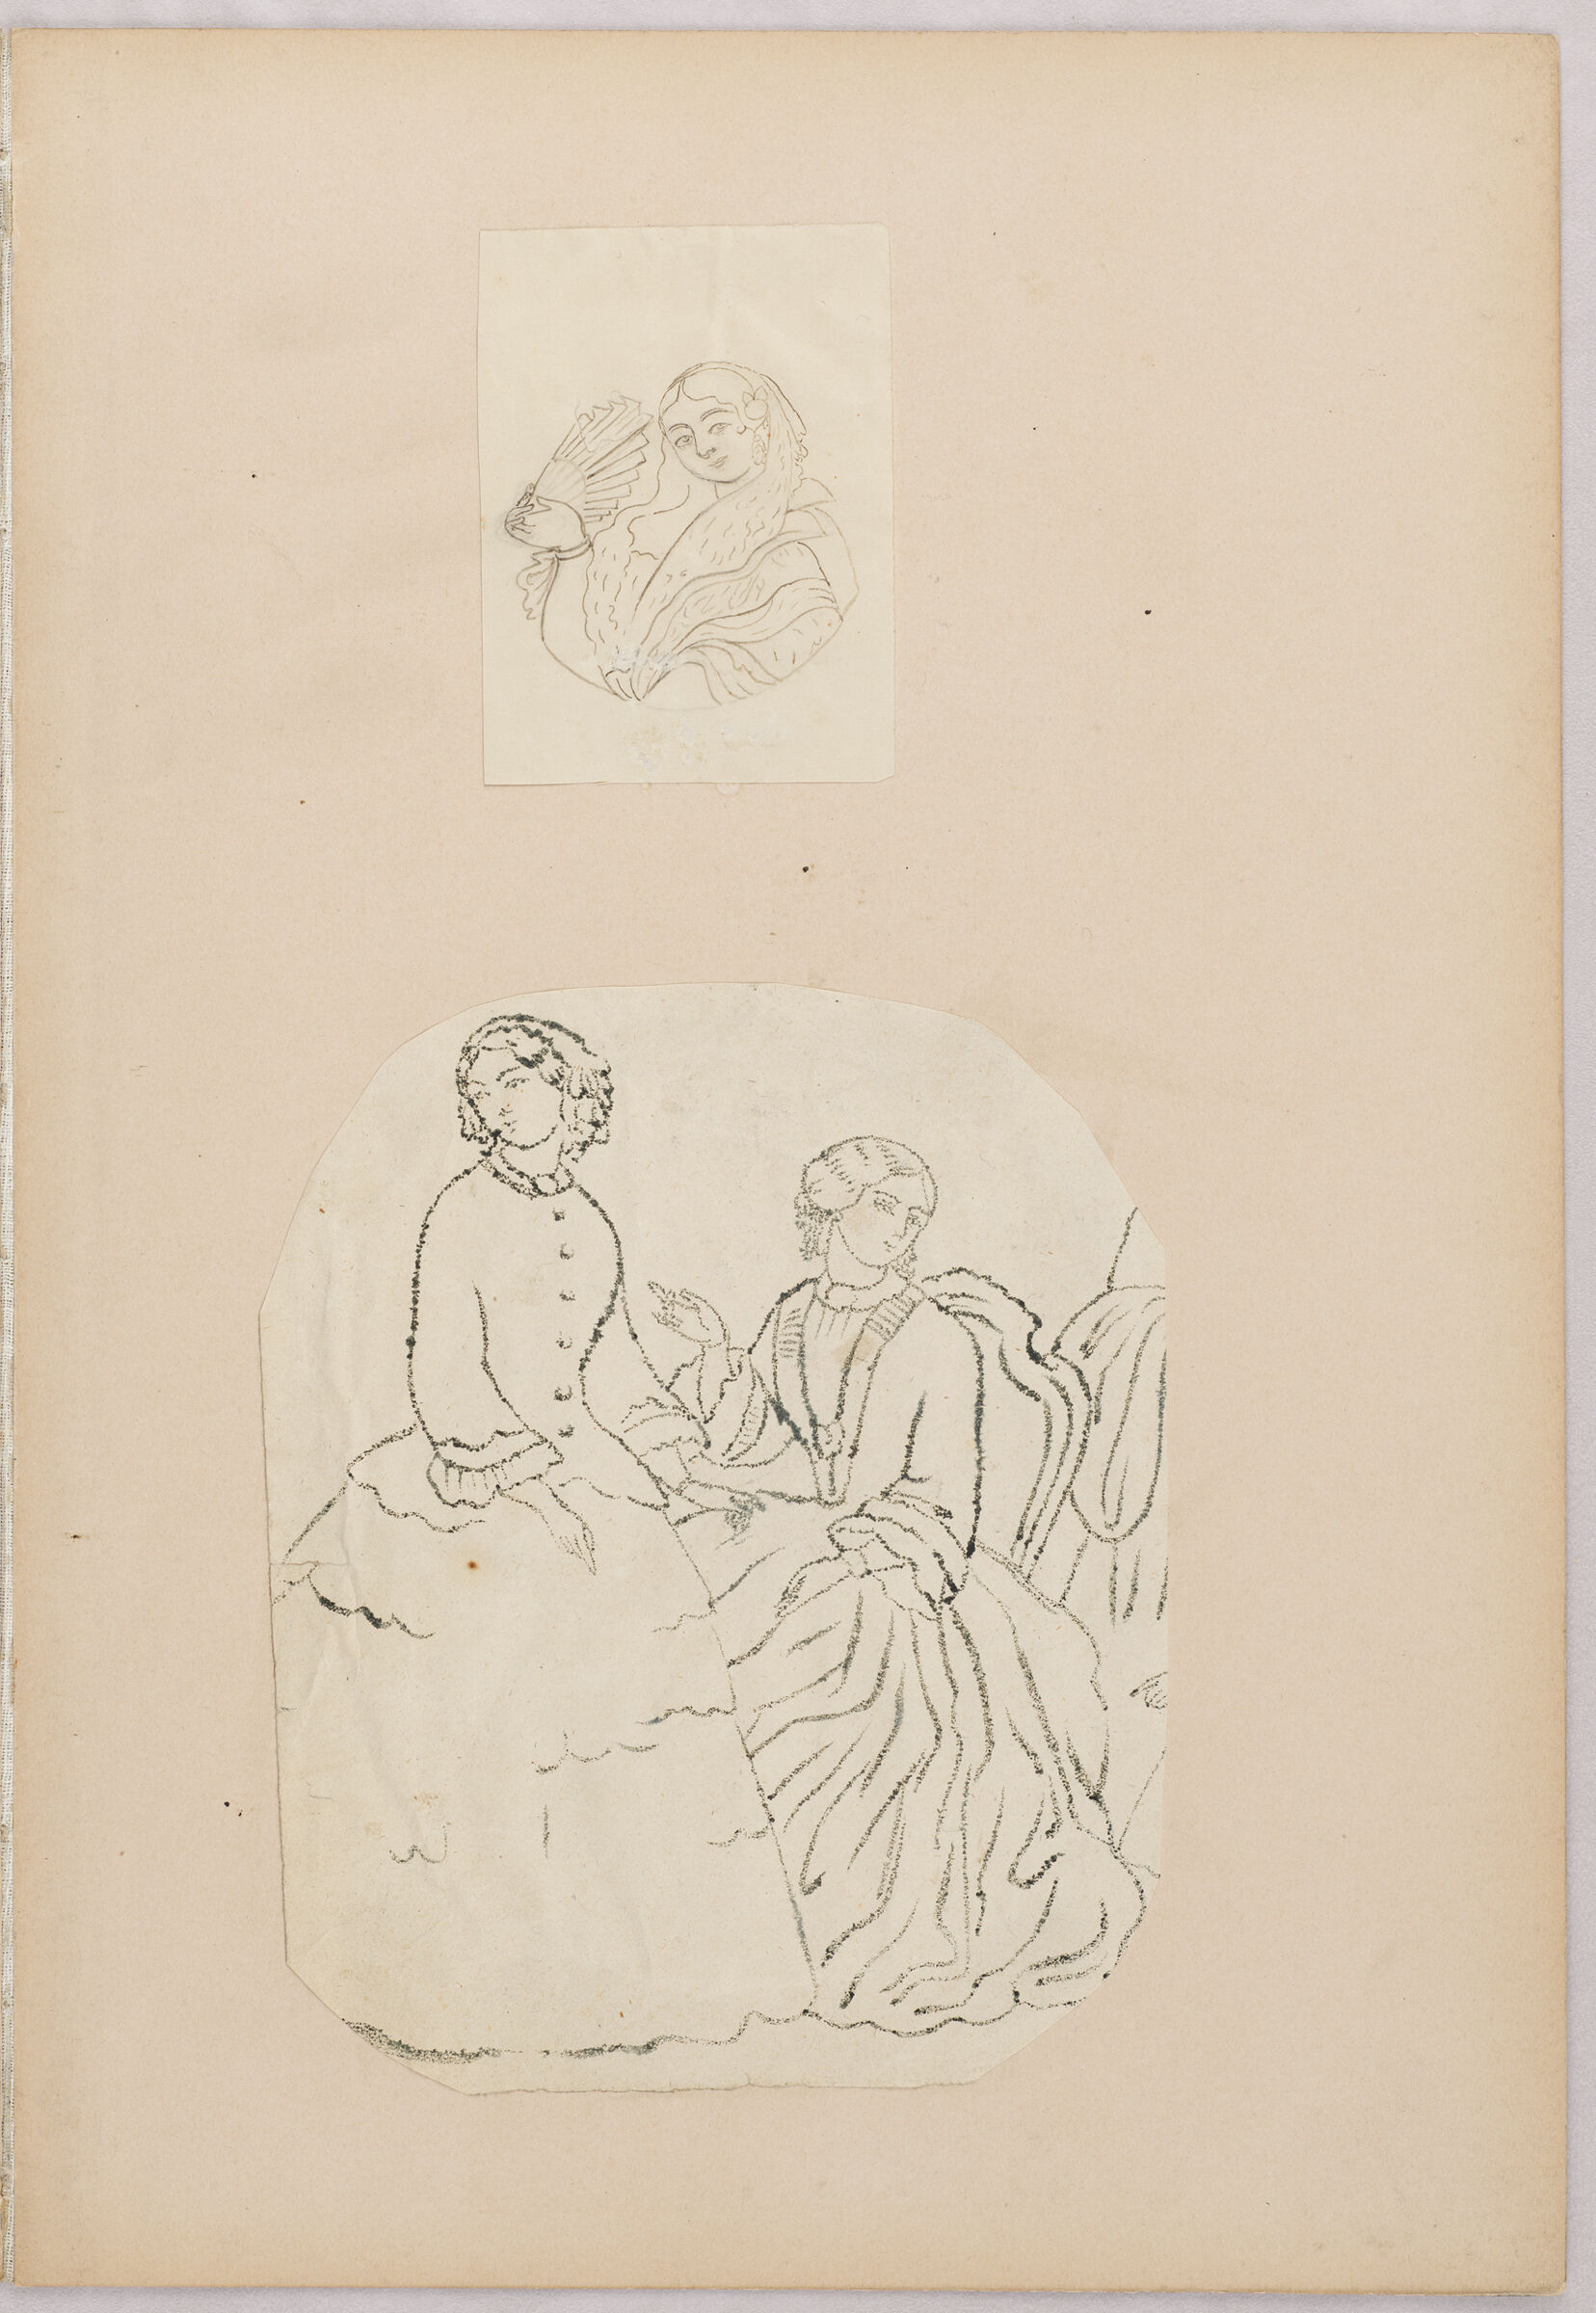 Folio 43 From An Album Of Drawings And Paintings: Two Sheets: Feline; Quails (Recto); Two Drawings: Woman With Fan; Two Women In European Dress  (Verso)